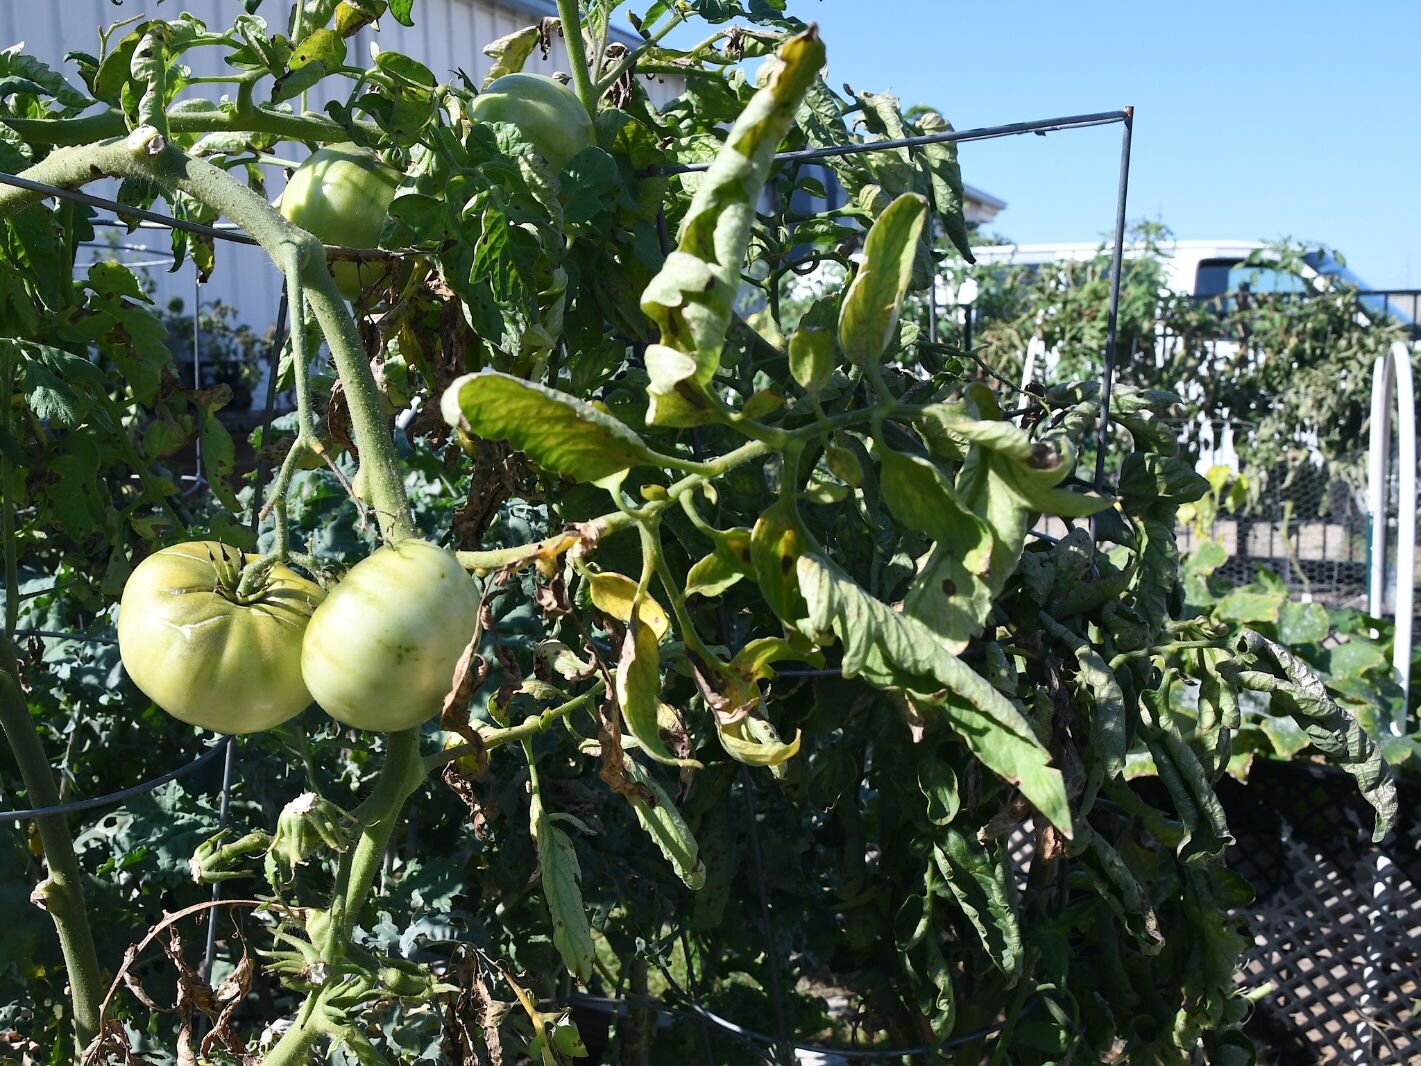 Tomatoes and other vegetables in the SHARE Center’s garden.